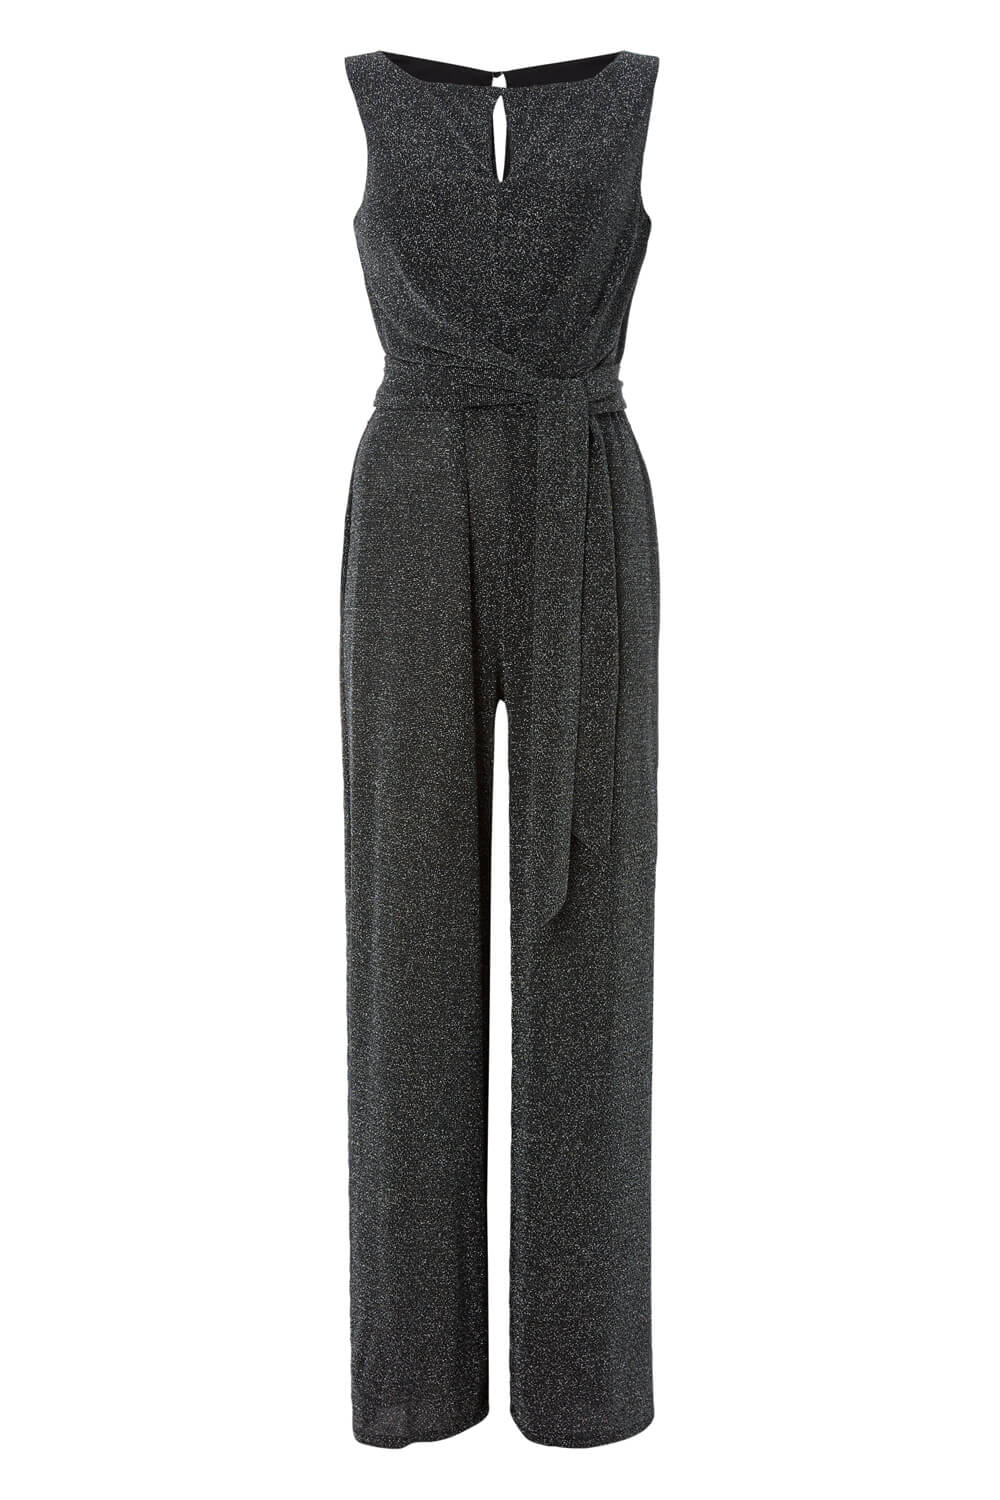 Silver Belted Glitter Jumpsuit, Image 4 of 4